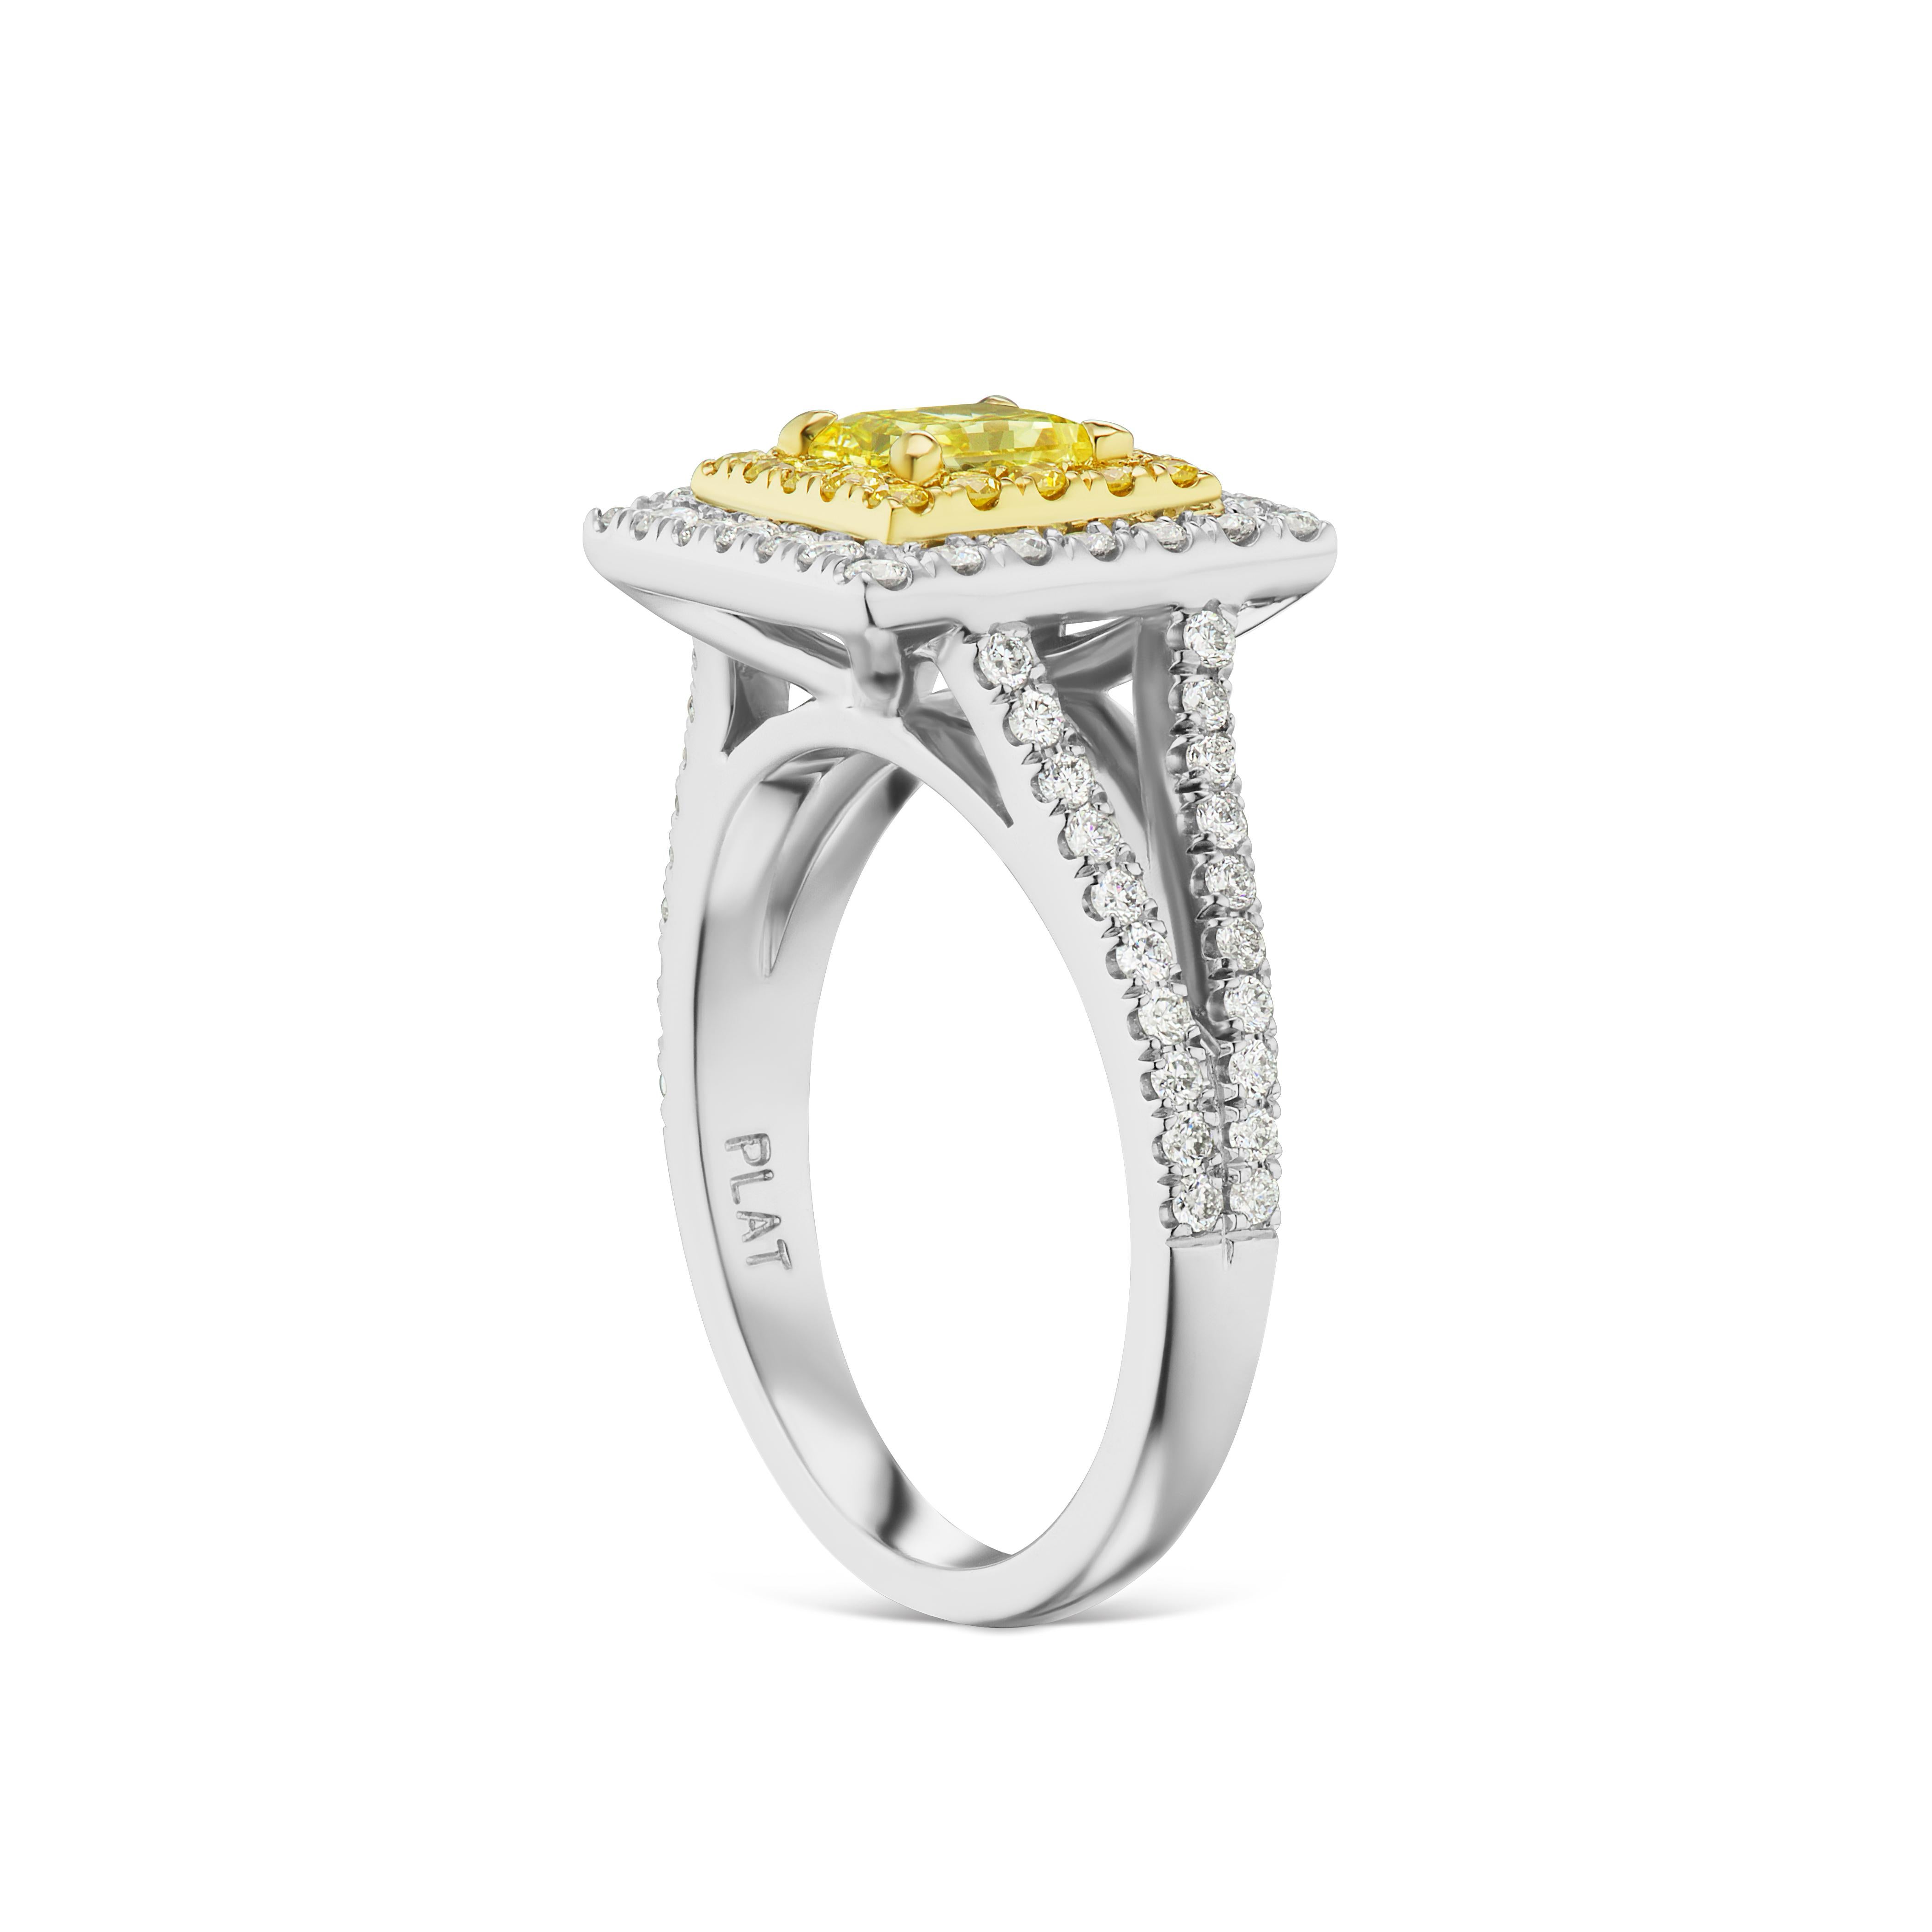 This Fancy Intense Yellow Certified .60 ct. Princess stunner is surrounded by another .17ct. total weight of fancy intense melee. It's a micro blast of sunshine! The Platinum and 18kt ring also contains .53 ct. total weight of FVS white diamond